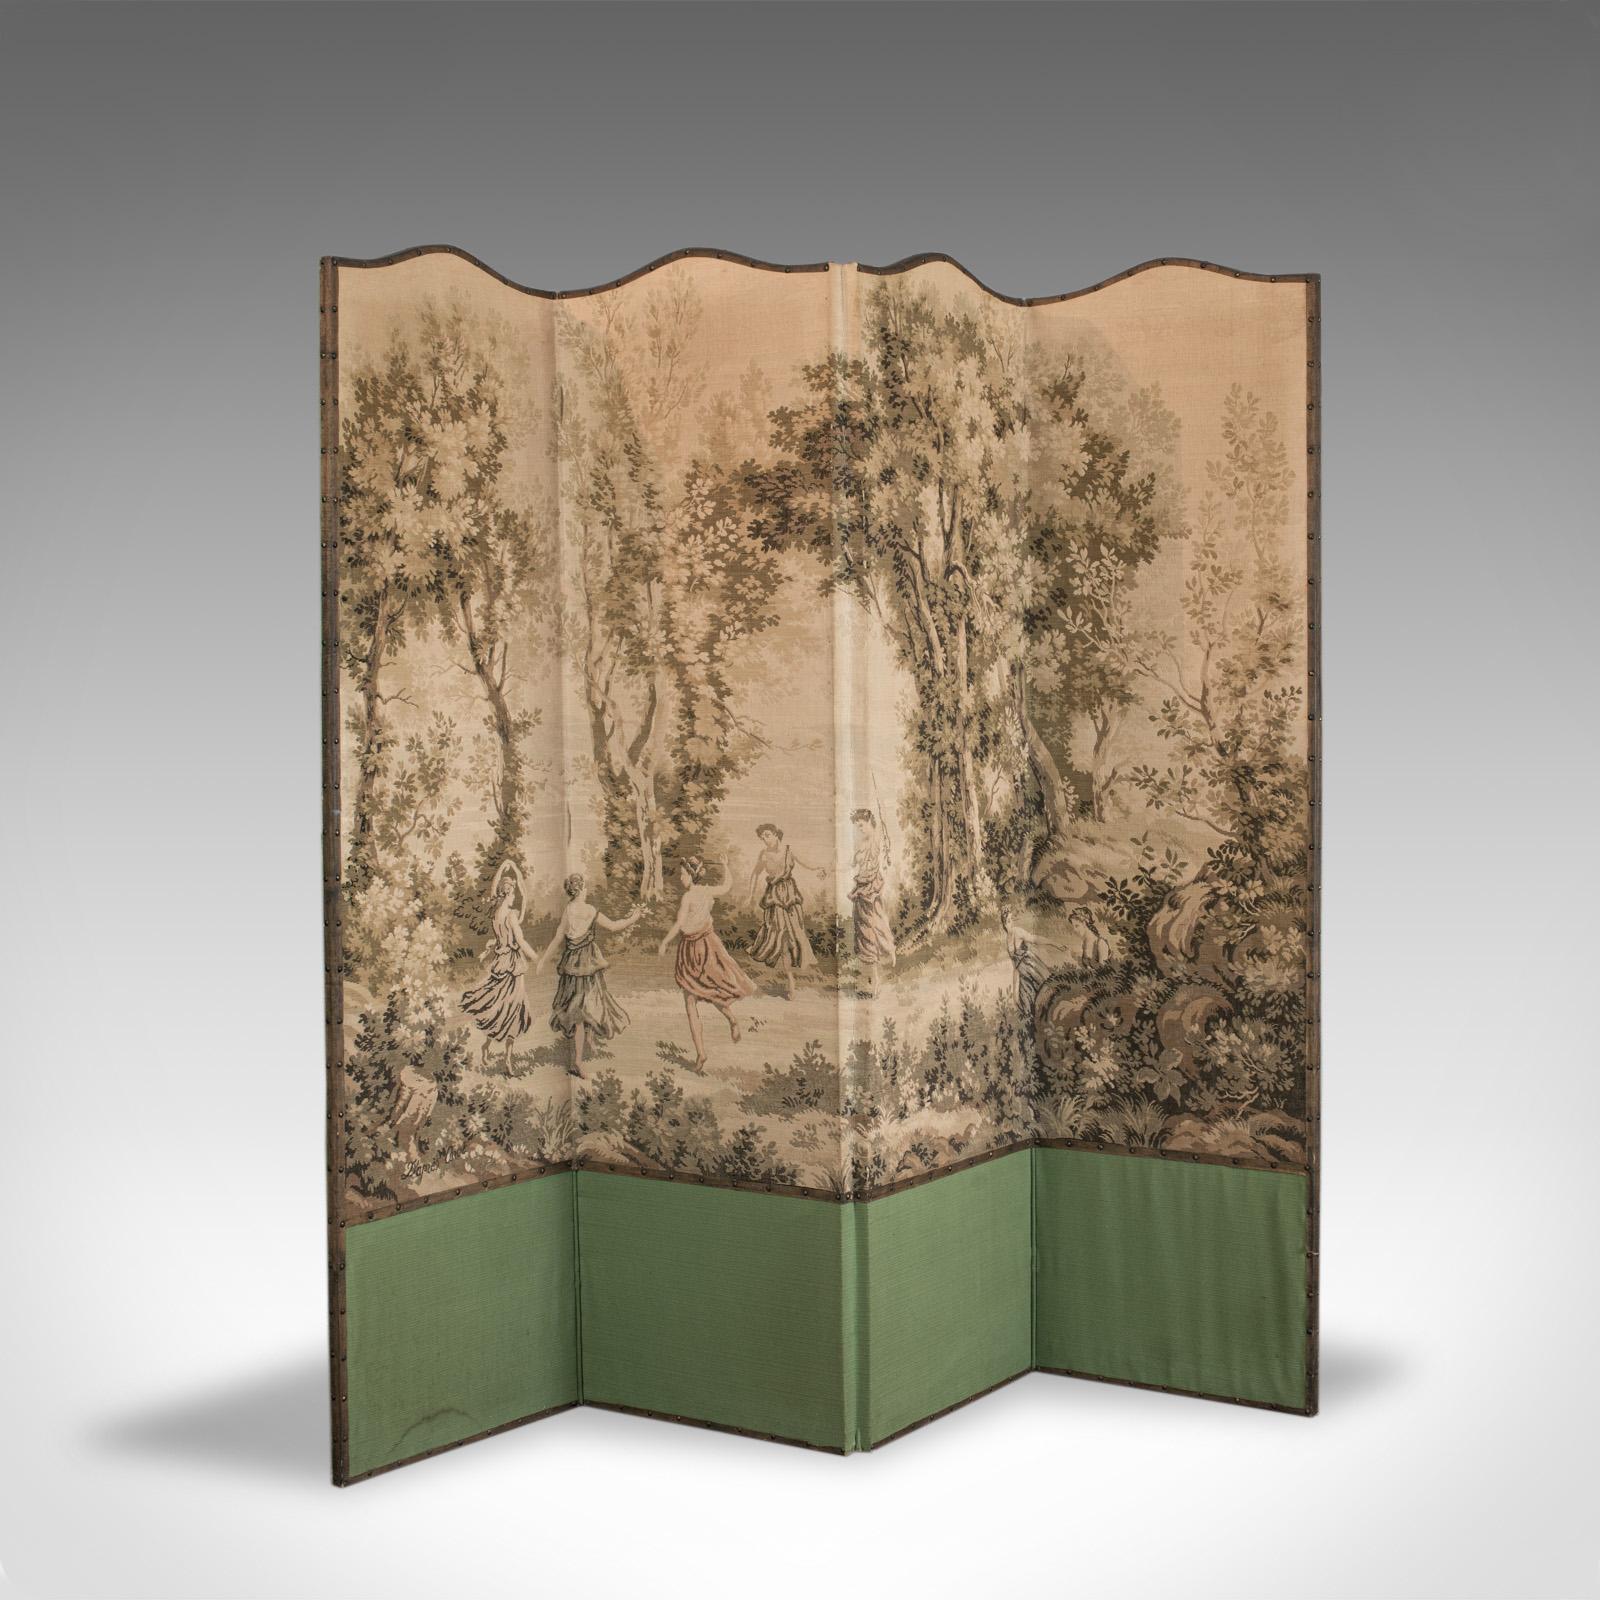 This is an antique room divider. A French, needlepoint screen or photography prop featuring a tapestry of Jean Corot's Dance of the Nymphs and dating to the late 19th century, circa 1880.

Classic Victorian period screen with art historical